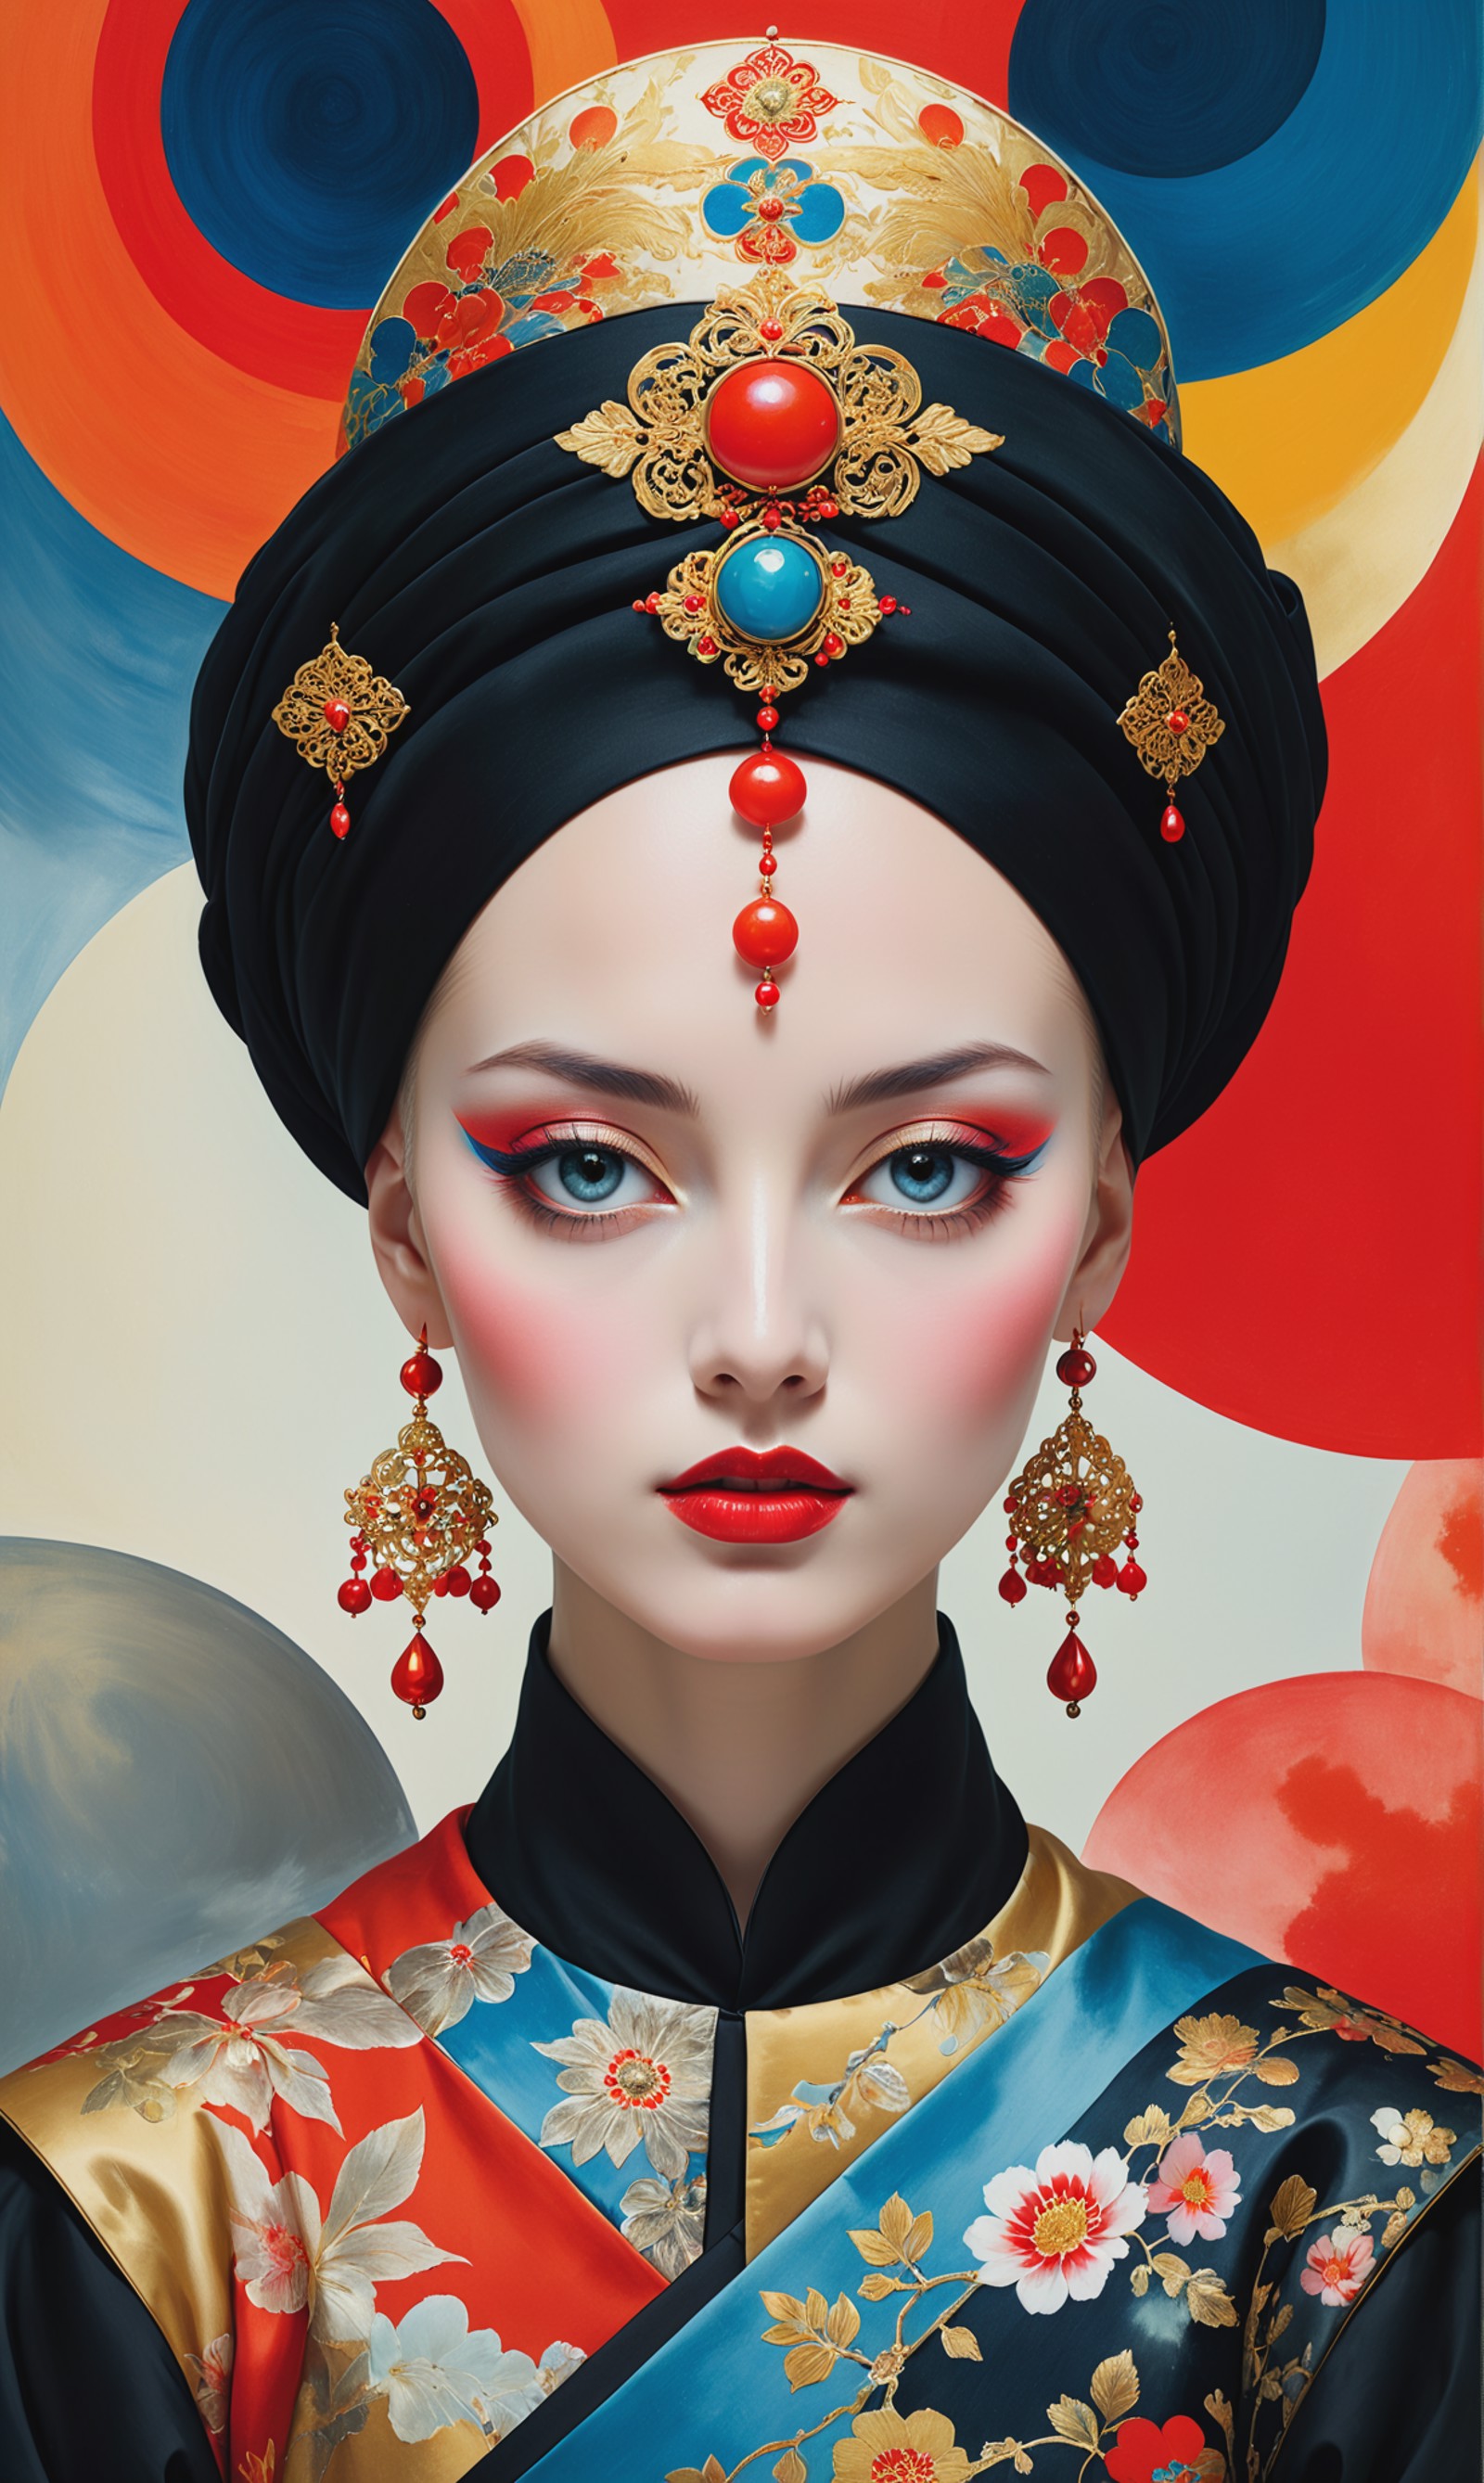 Angelic beauty with heterochromia, bald head adorned with a turban, dressed in ornate Chinese garments, face portraying th...